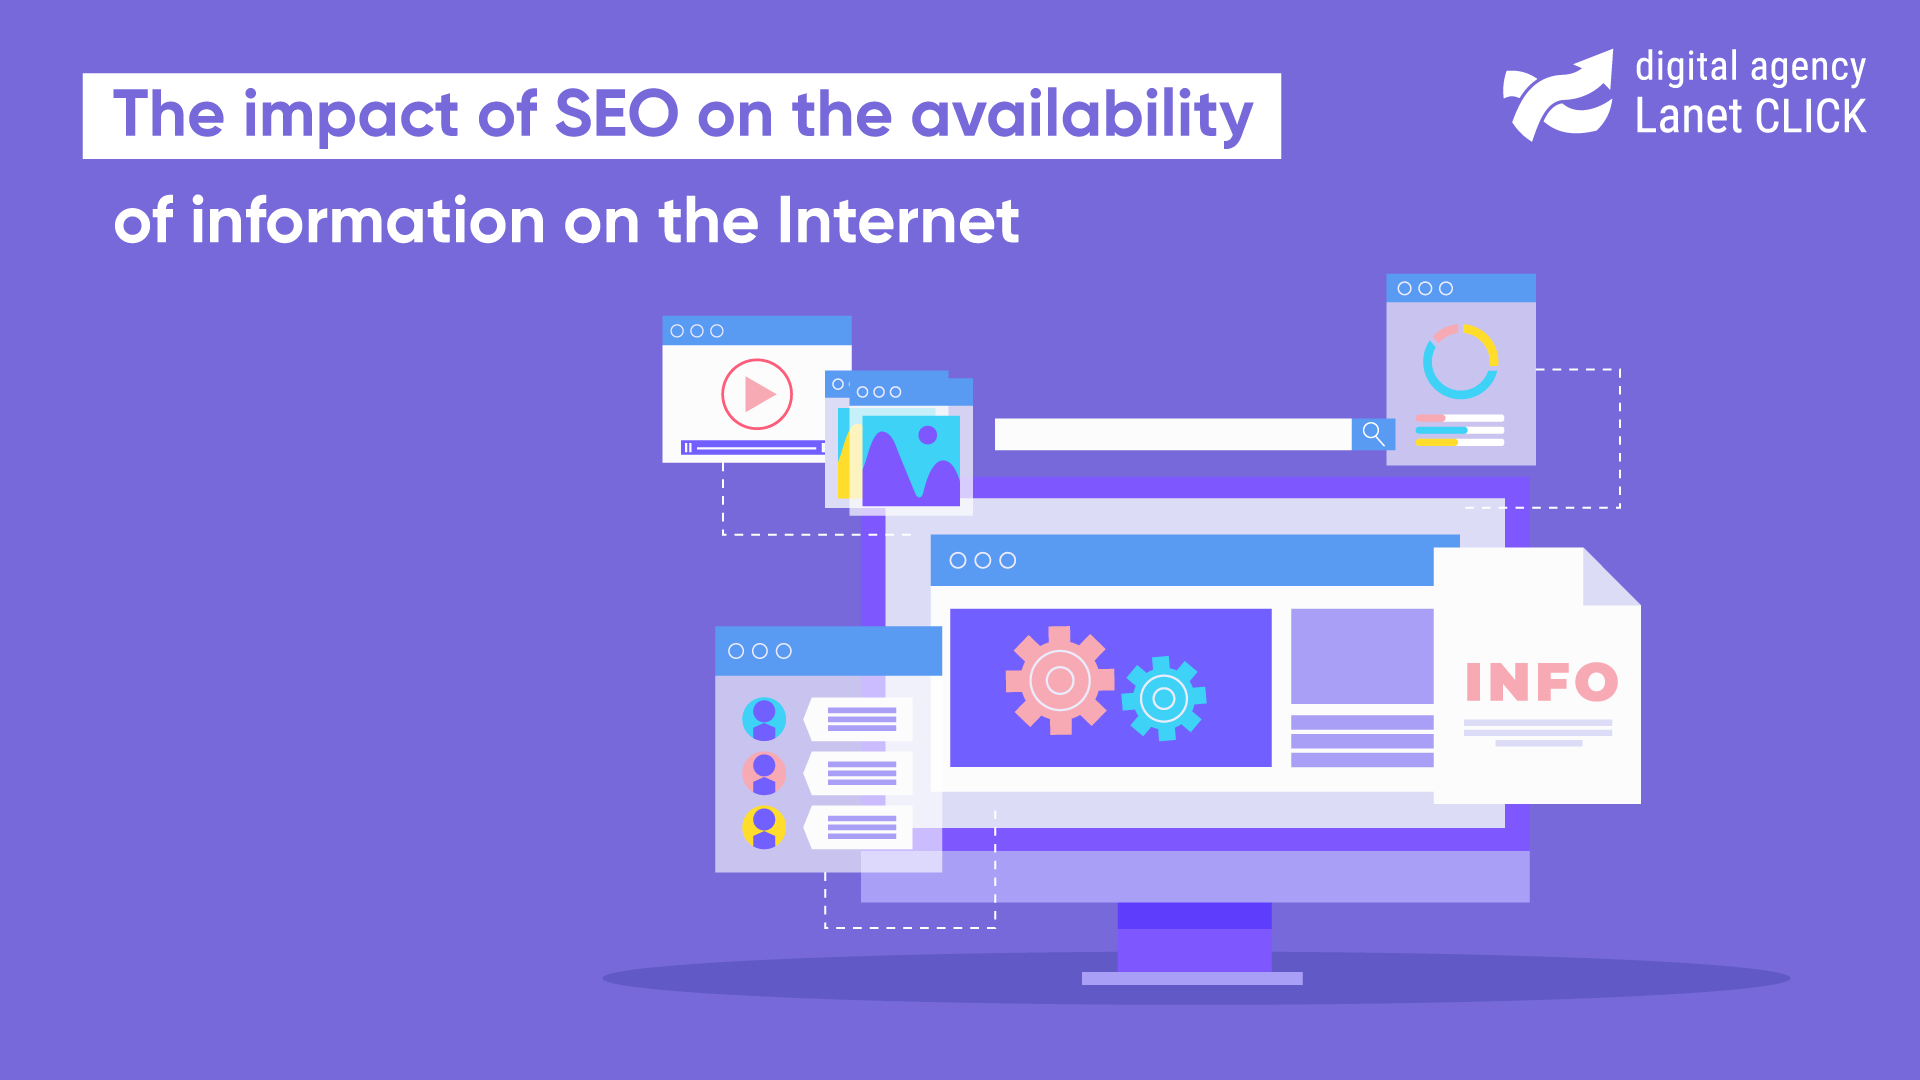 The impact of SEO on the availability of information on the Internet